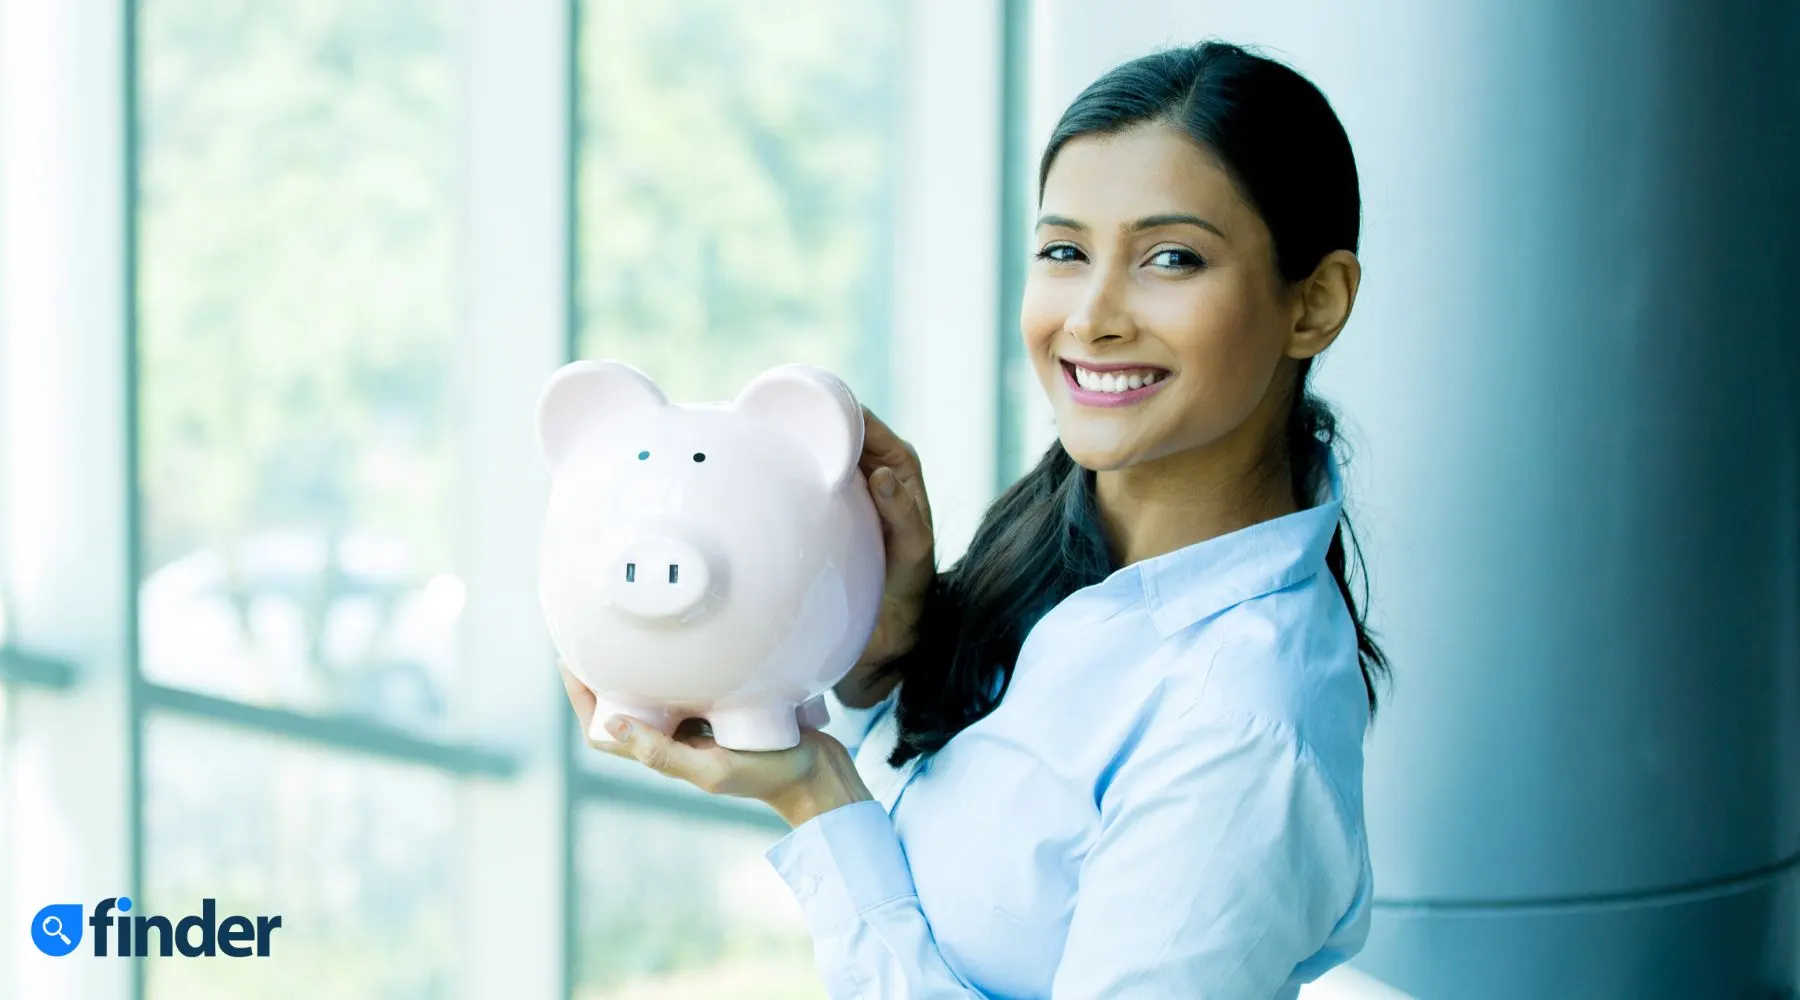 Woman_With_Piggy_Bank_Canva_1800x1000